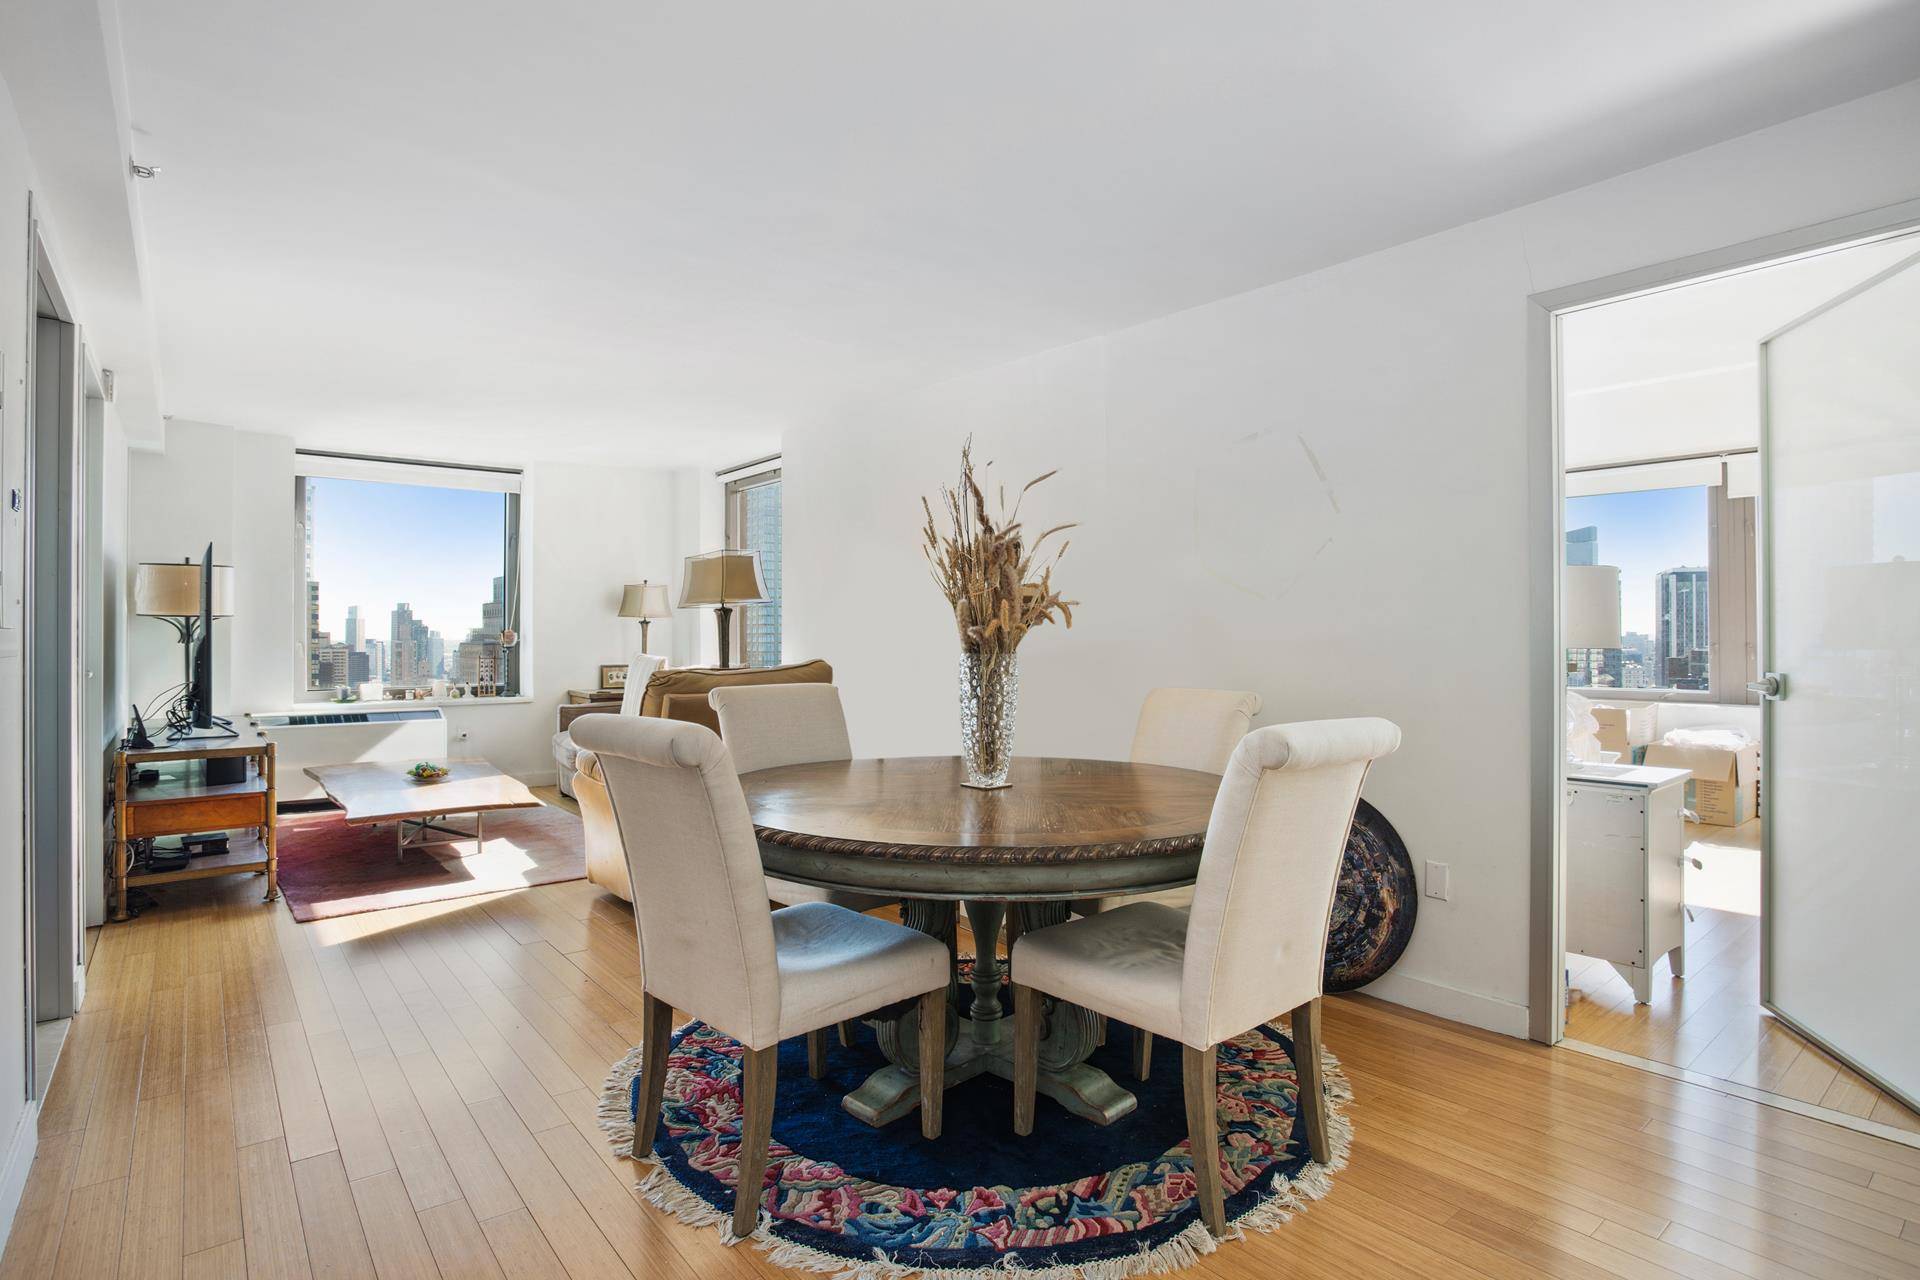 Stunning panoramic views to the south and east grace this two bedroom, two bathroom apartment in close proximity to Bryant Park.